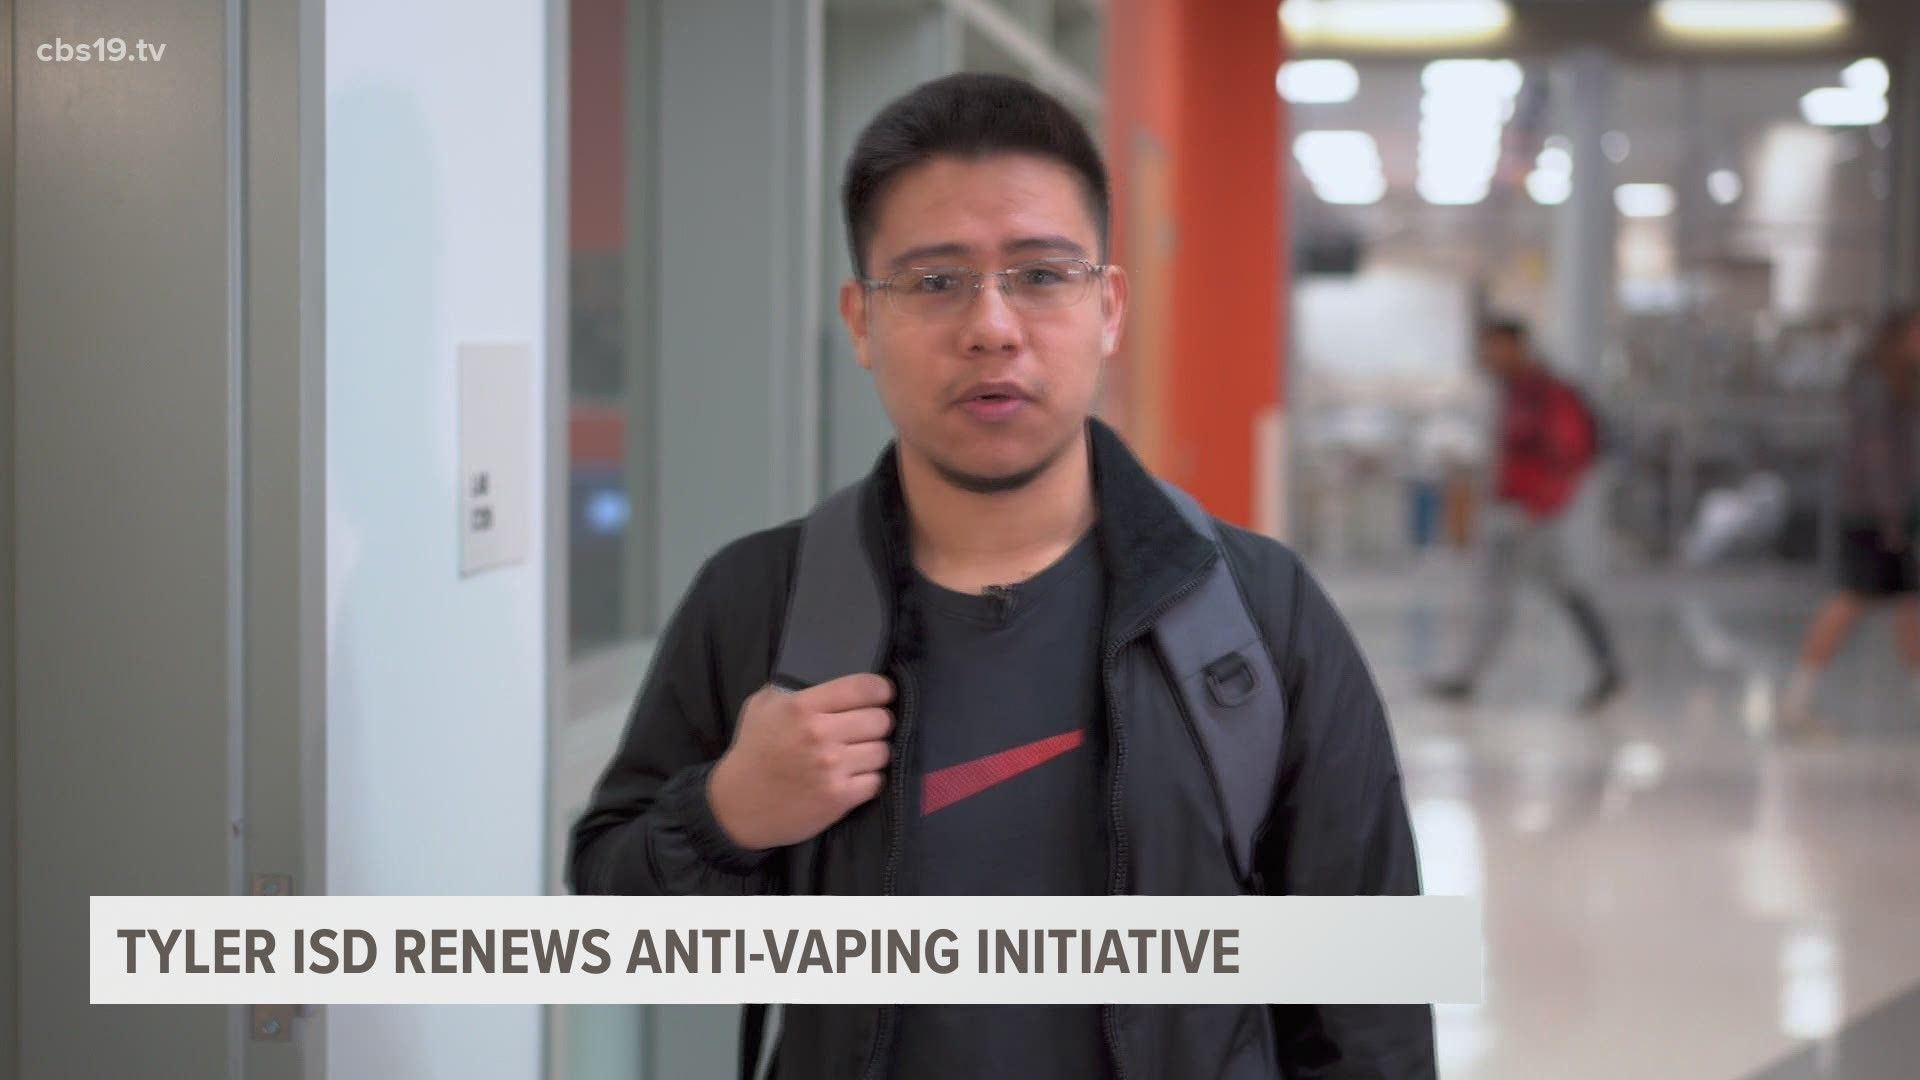 Tyler ISD sees uptick in vaping, plans to educate students with anti-vaping campaign